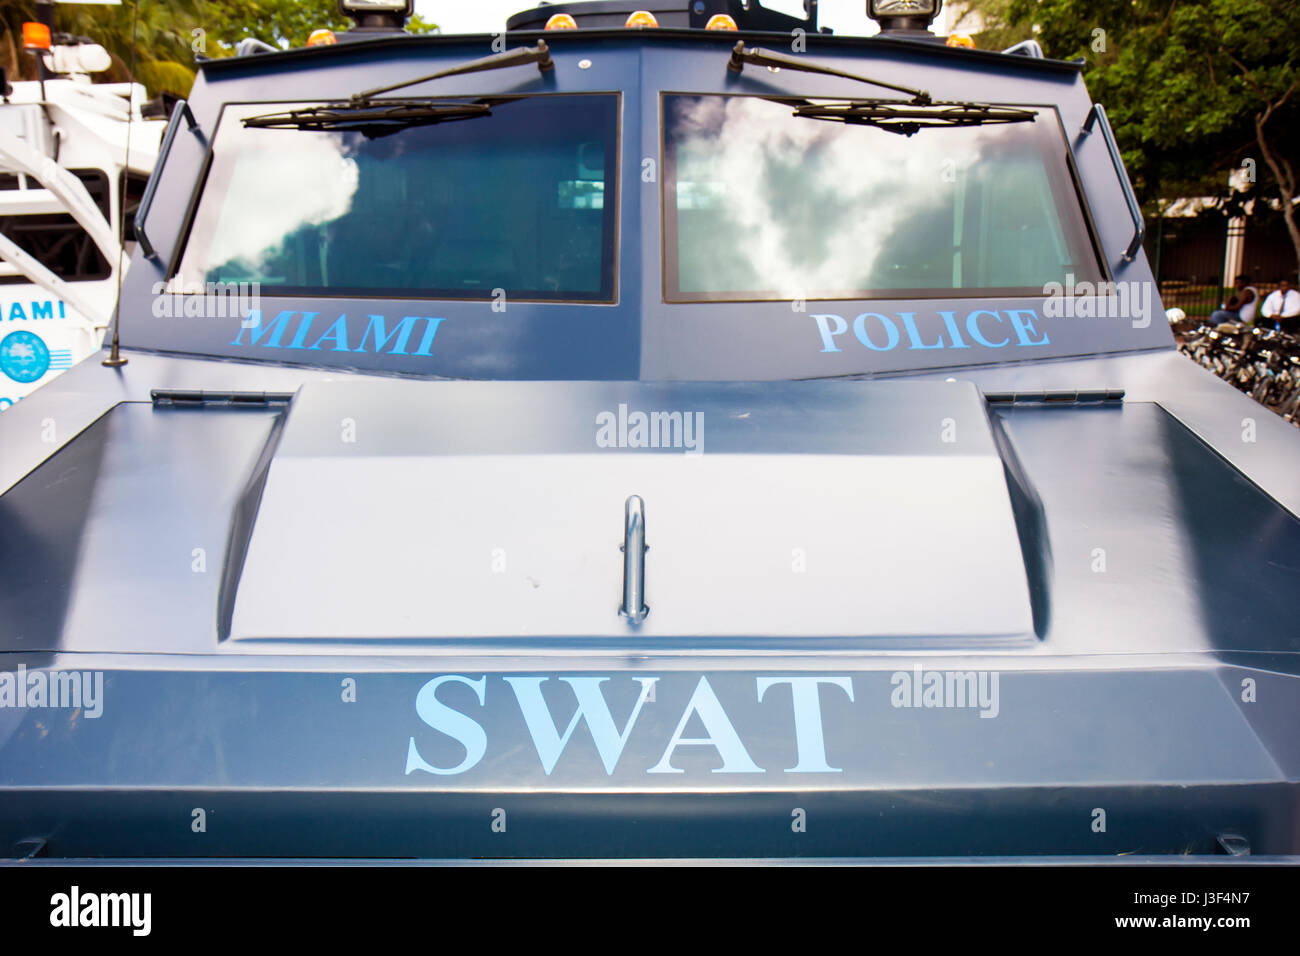 Miami Florida,Miami Police Department,Police Recruitment Open house,houses,specialized equipment display sale SWAT,vehicle,protect,public safety,armor Stock Photo